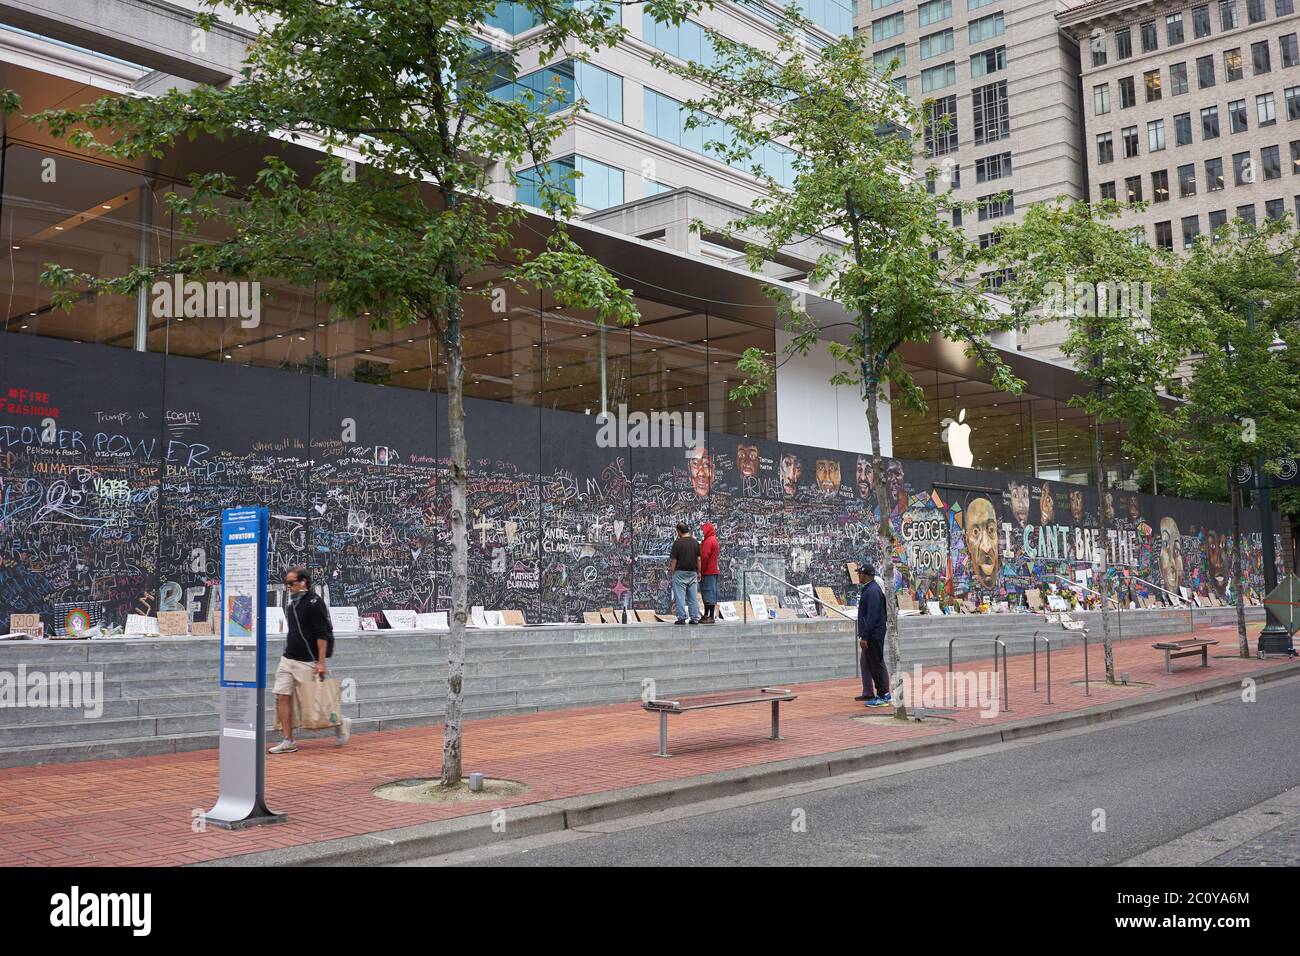 The boarded-up Apple Store in downtown Portland's Pioneer Place, which has become unofficial canvases for peaceful protest, seen on Friday, 6/12/2020. Stock Photo